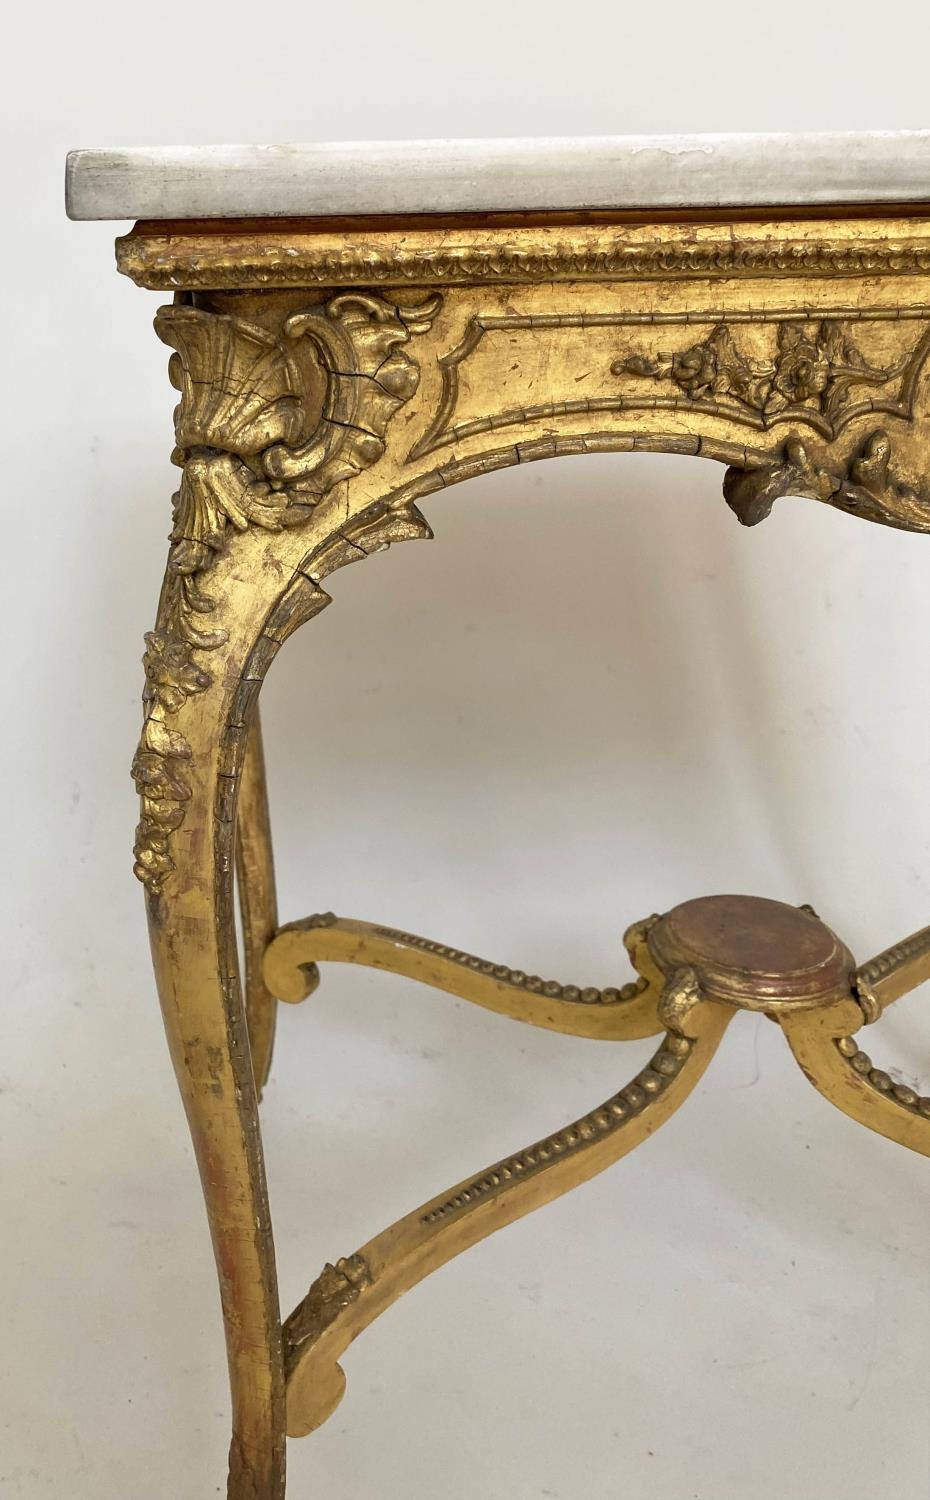 CENTRE TABLE, 19th century Italian giltwood and gesso with shell and C scroll decoration, marble top - Image 11 of 11